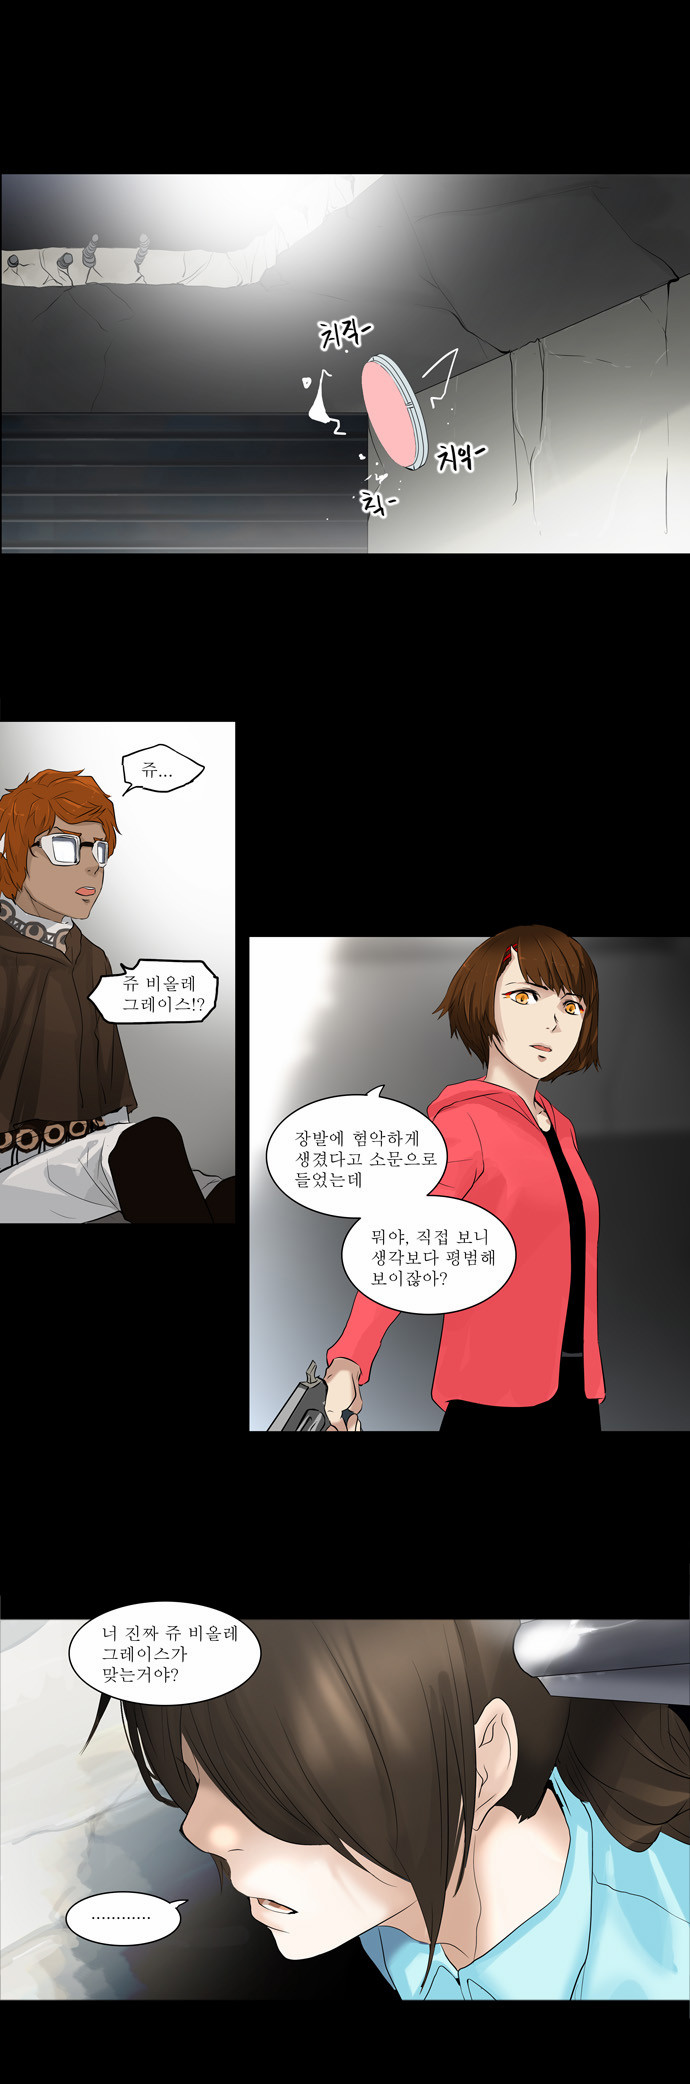 Tower of God - Chapter 141 - Page 1